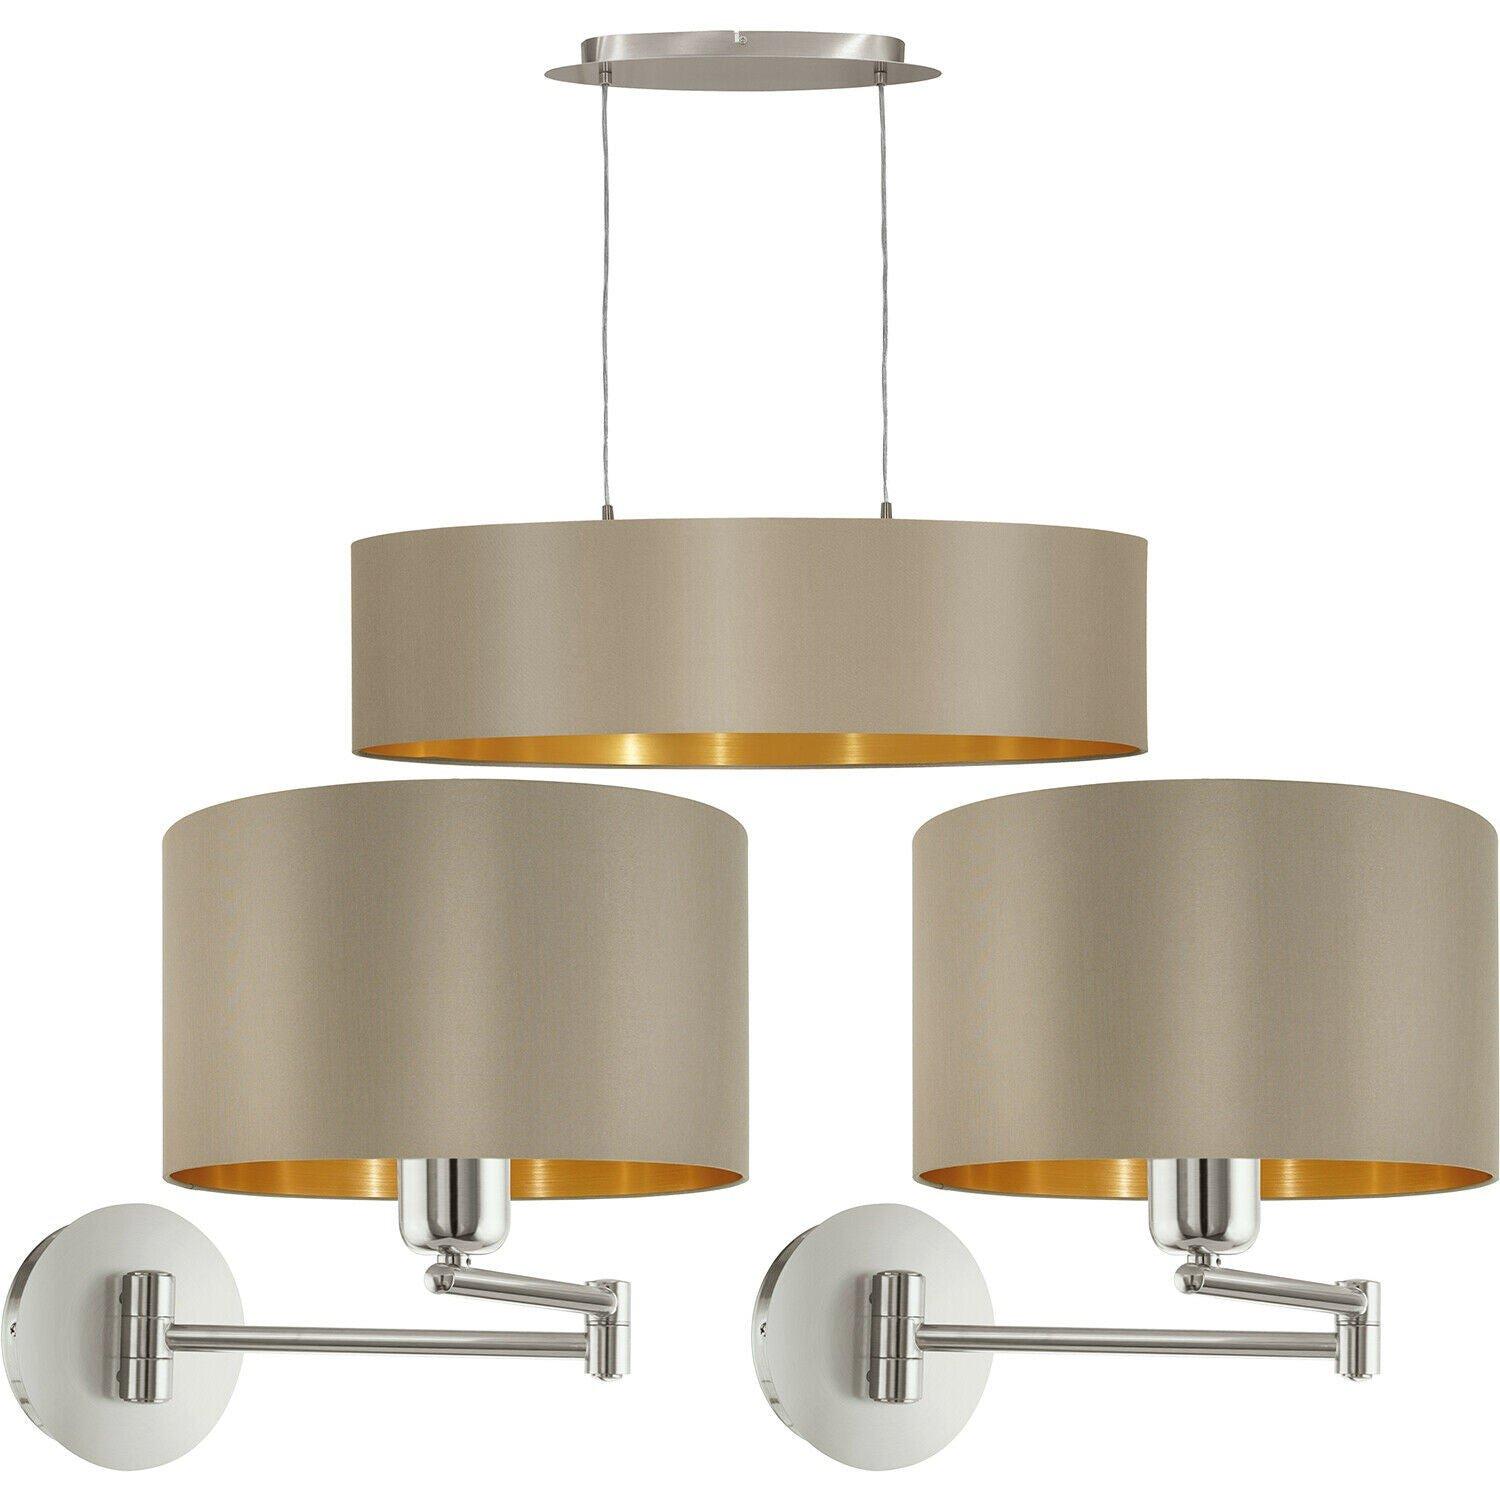 Ceiling Pendant Light & 2x Matching Wall Lights Taupe & Gold Large Linear Shade